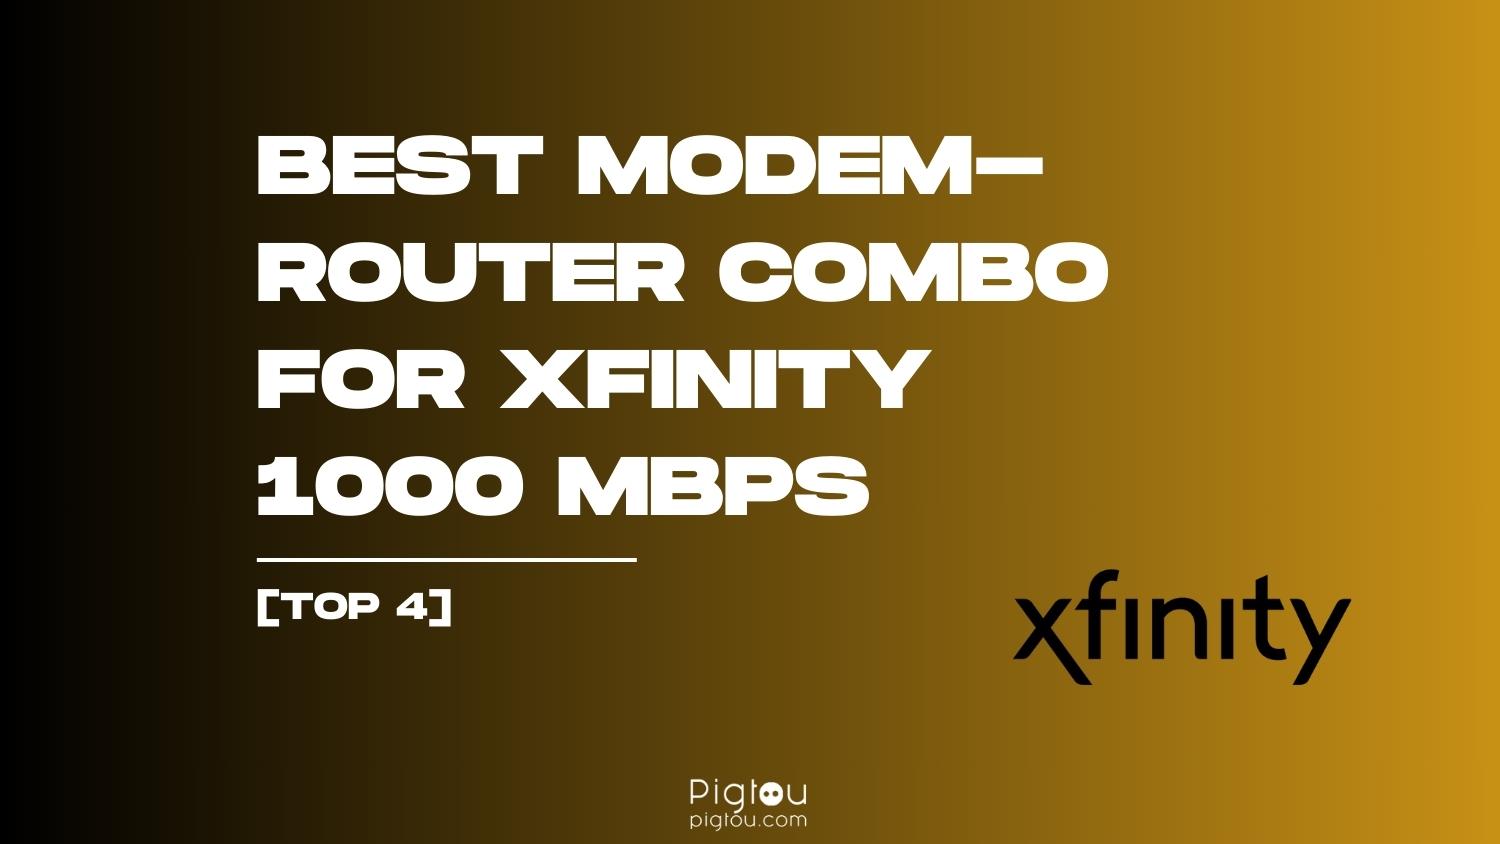 Best Modem-Router Combo for Xfinity 1000 Mbps